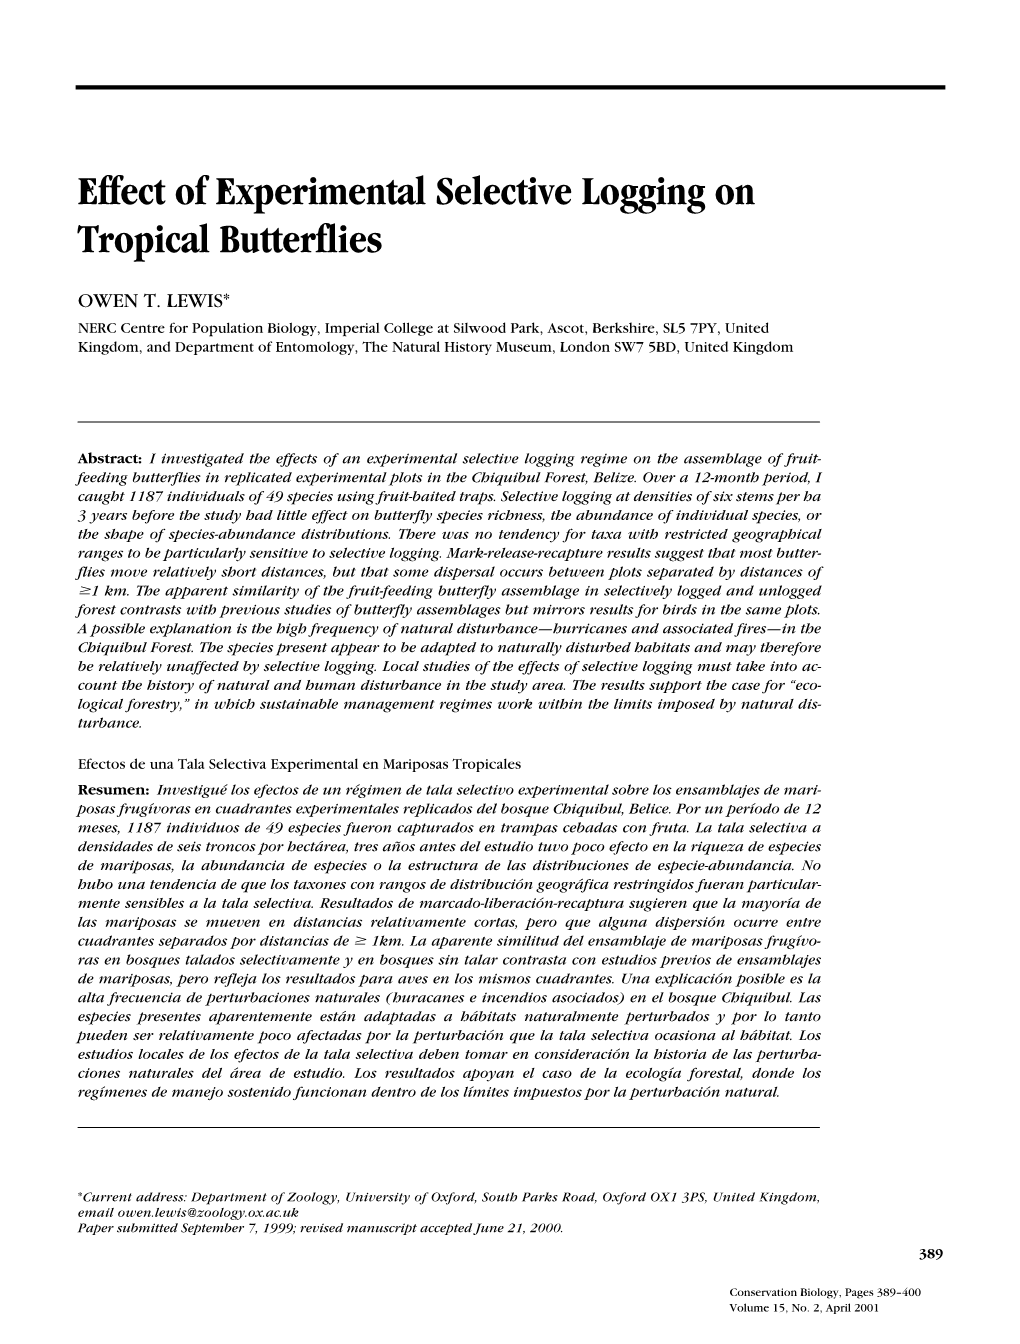 Effect of Experimental Selective Logging on Tropical Butterflies